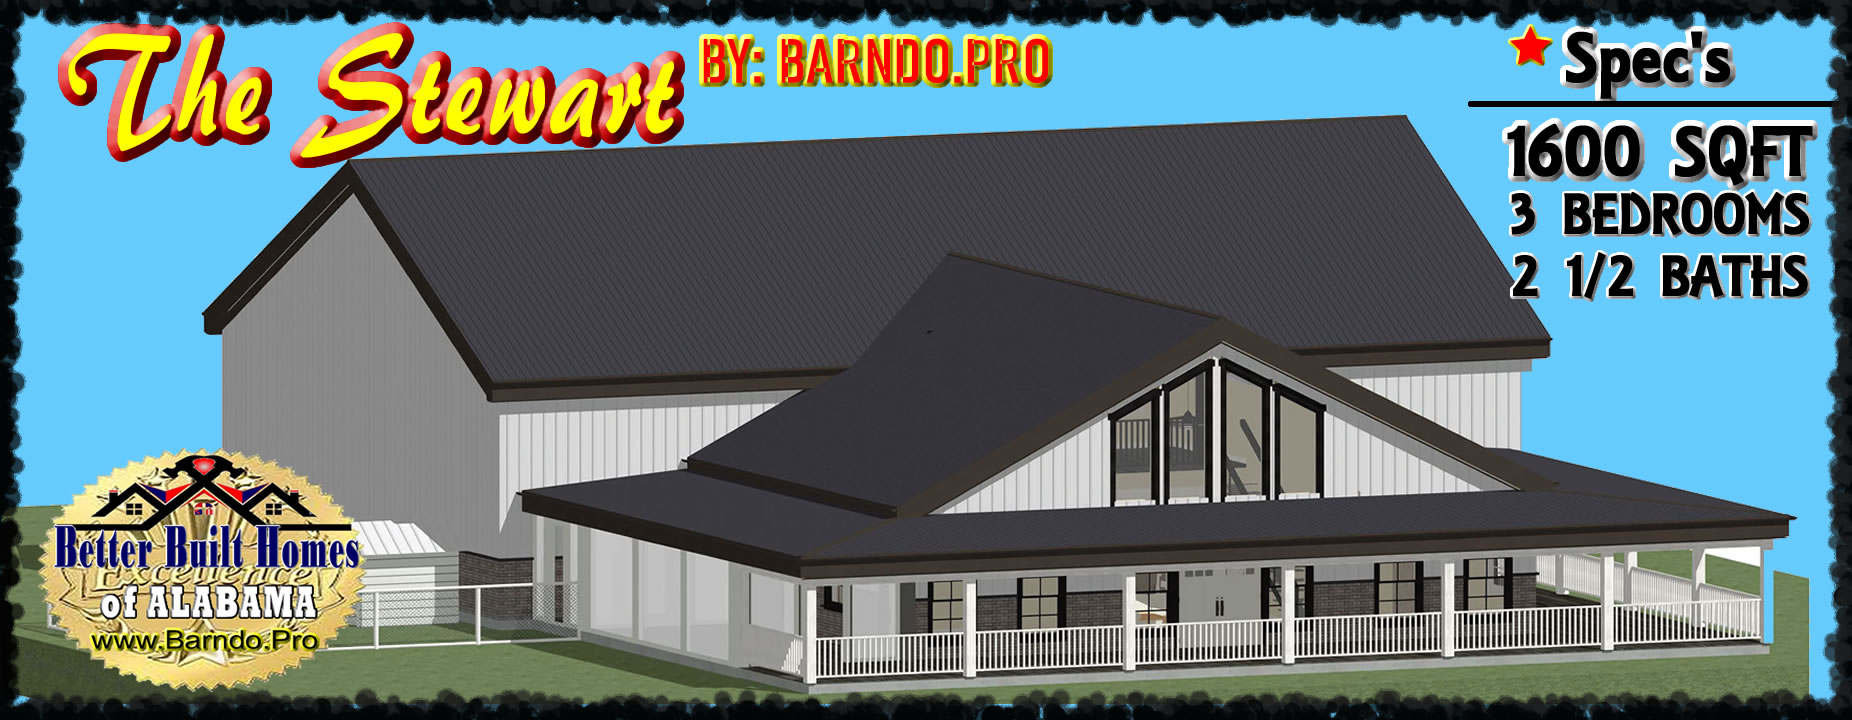 Stewart Barndominium Click to View more about this Barndo